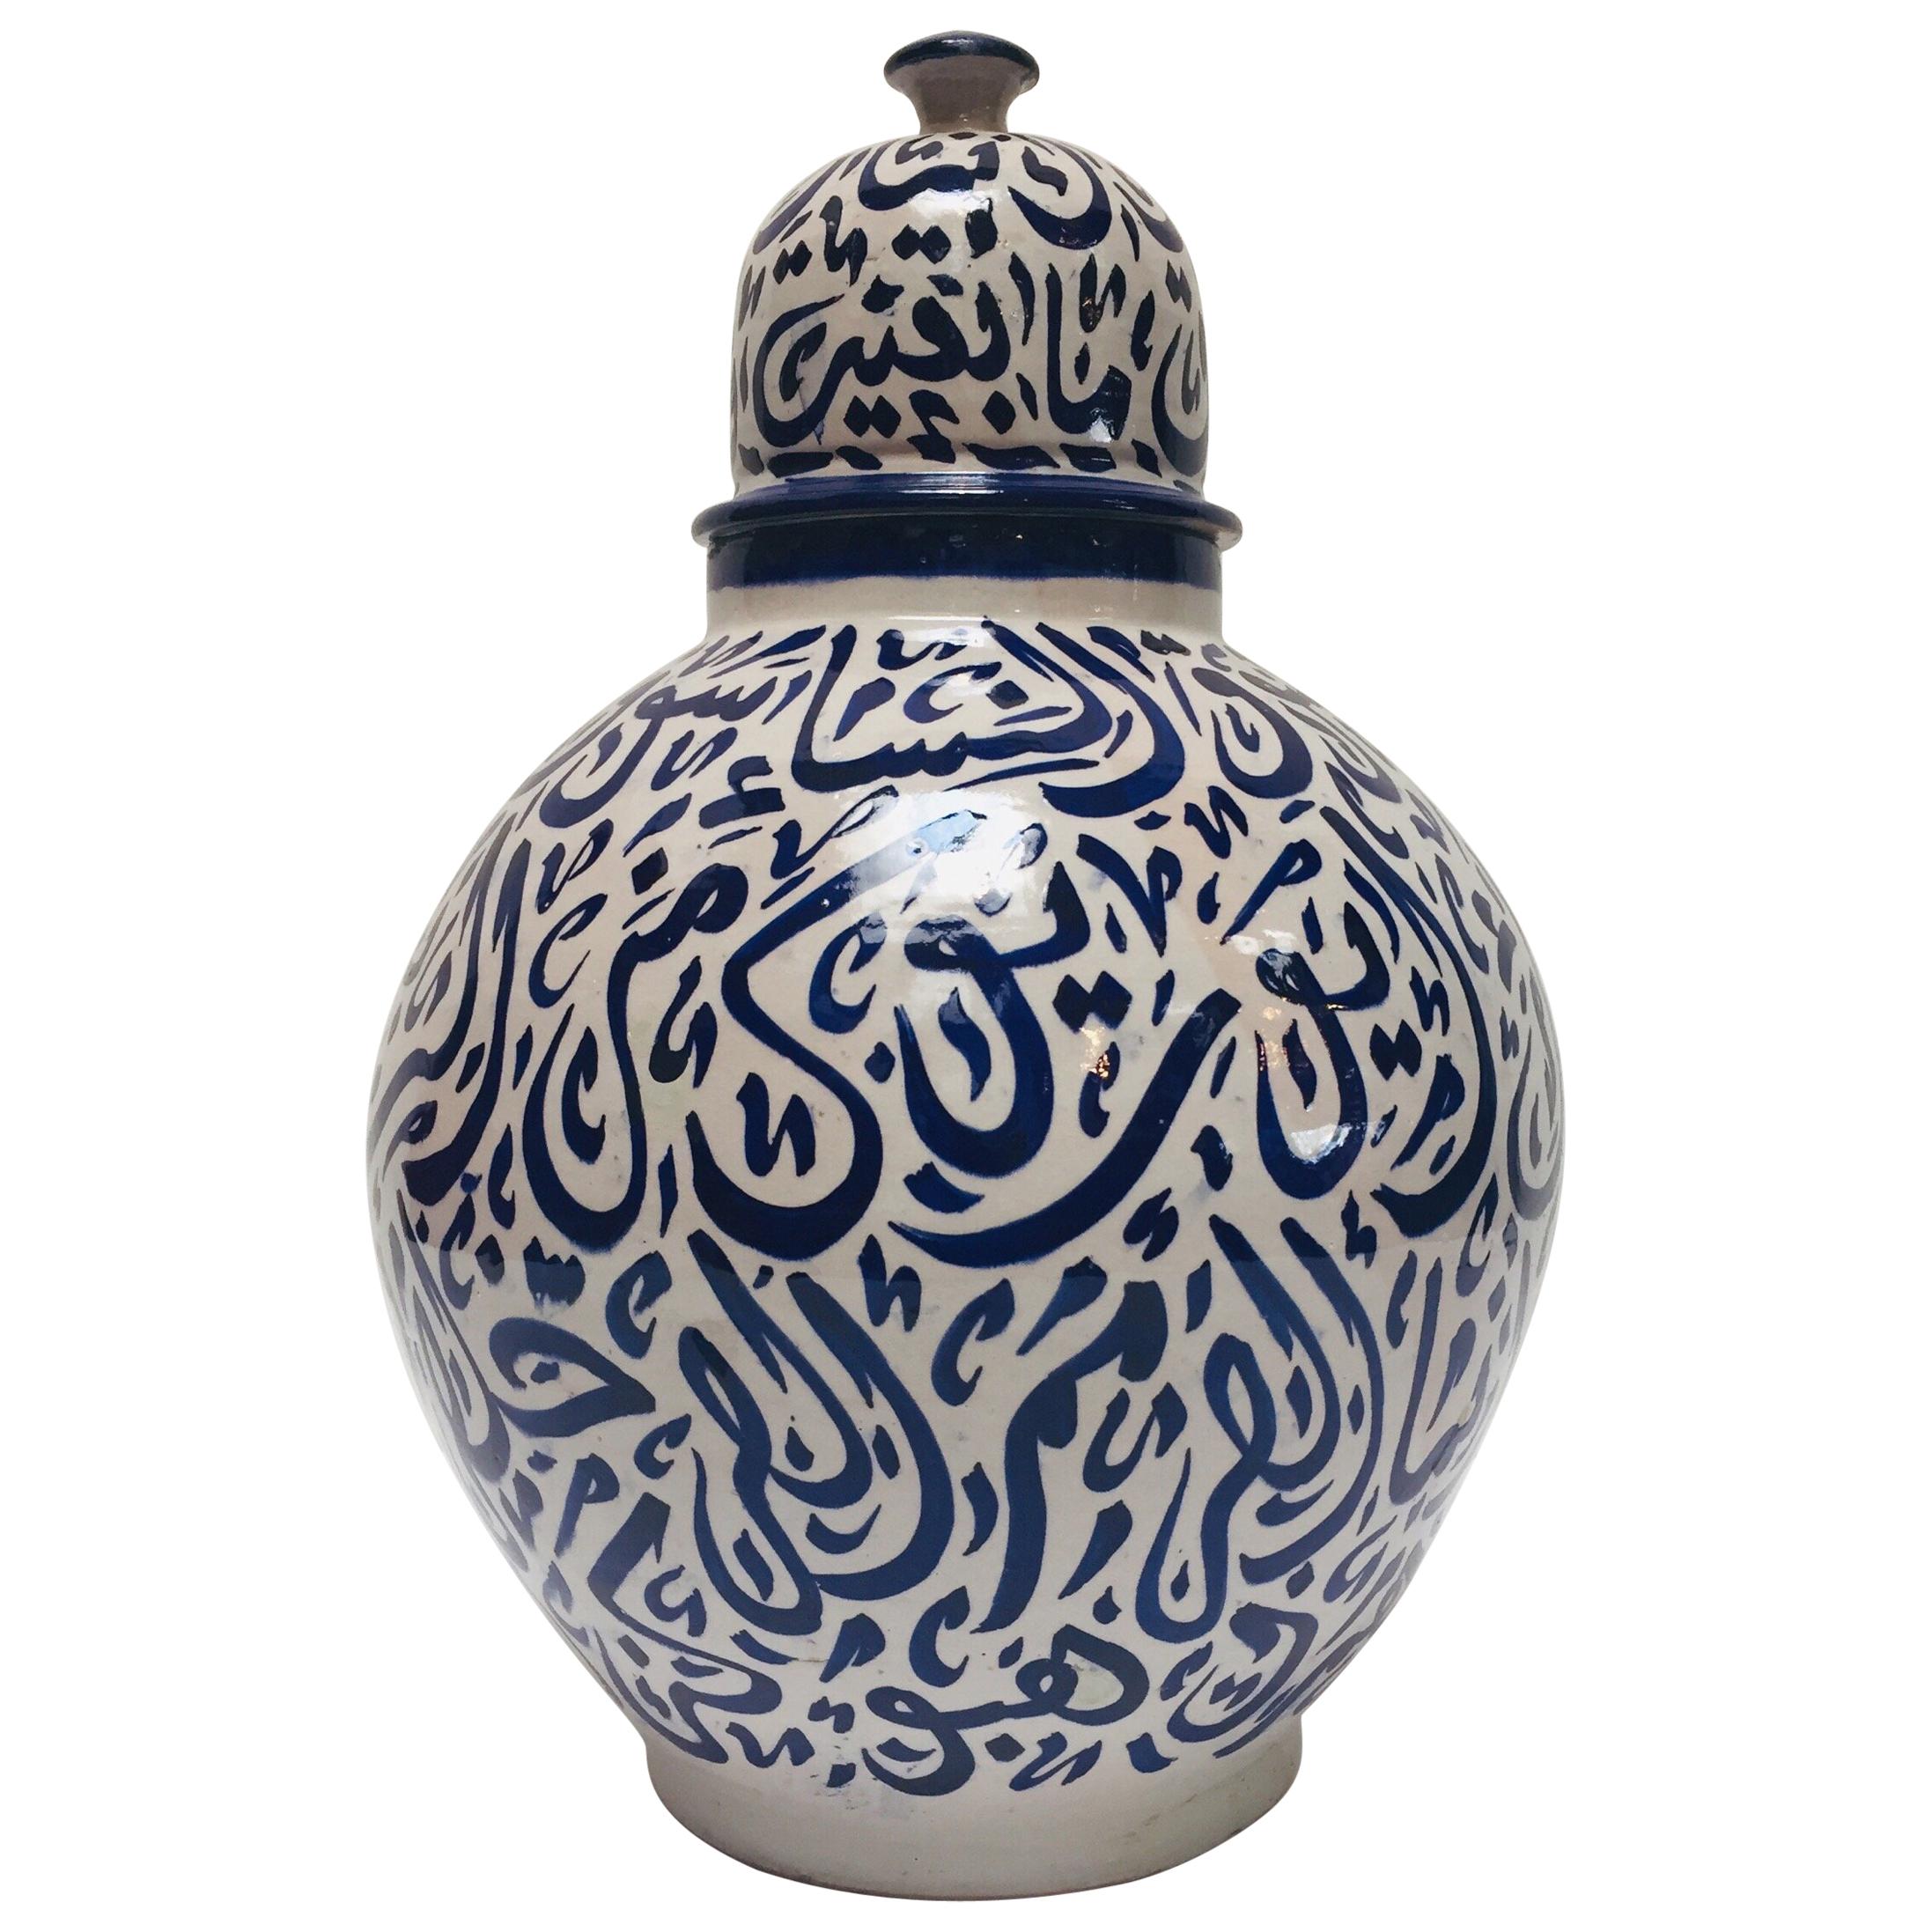 Moroccan Blue Ceramic Lidded Urn with Arabic Calligraphy Writing, Fez For Sale